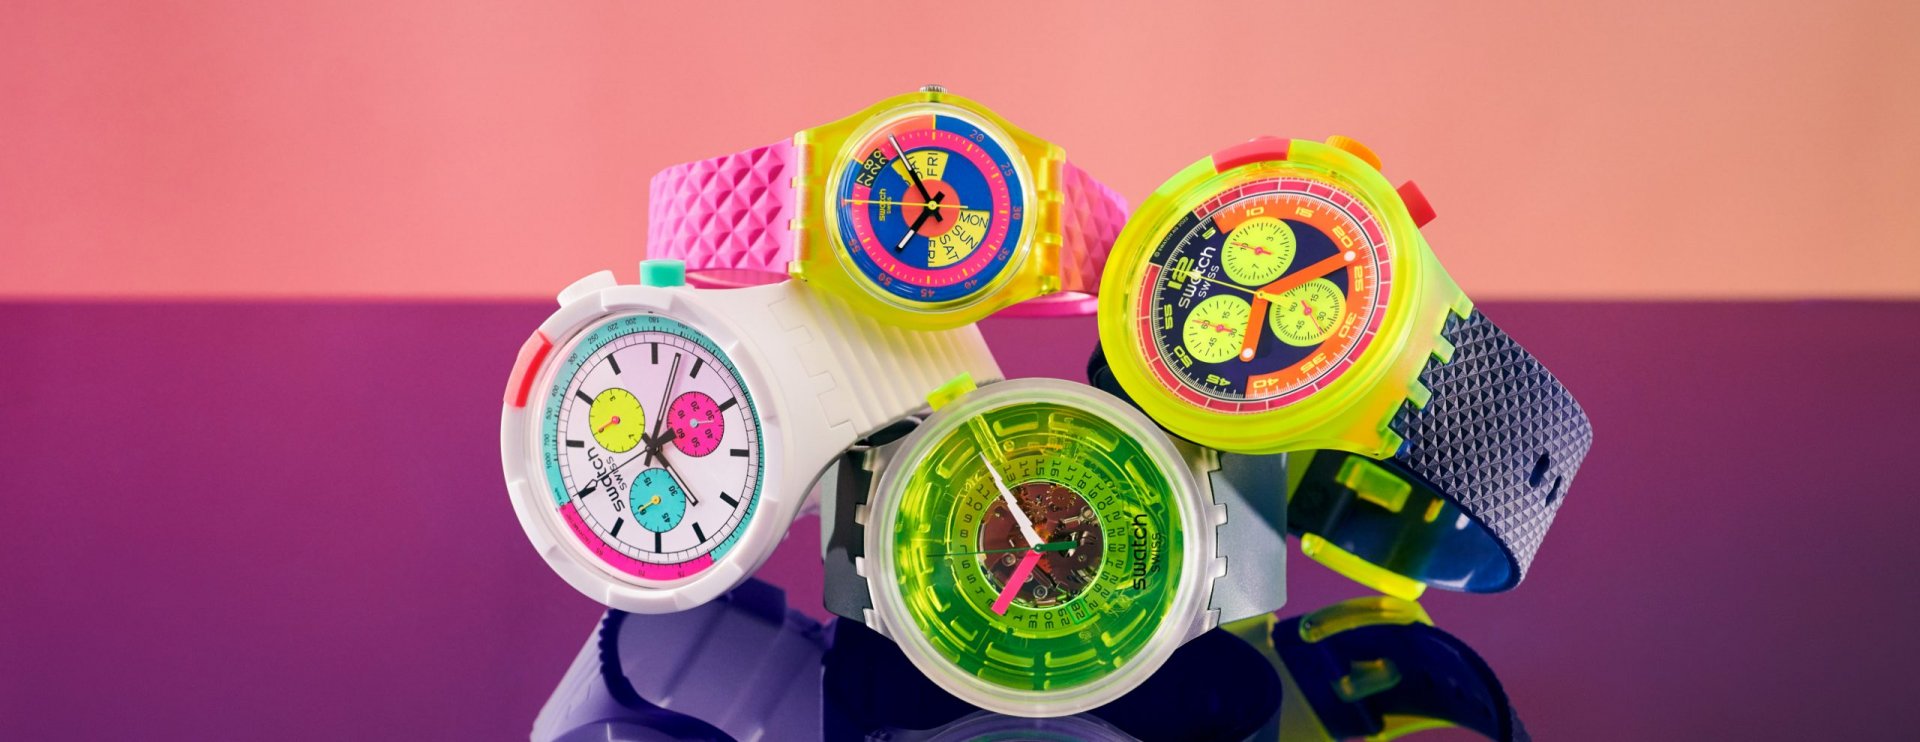 swatch-neon-collection-banner-scaled.jpg